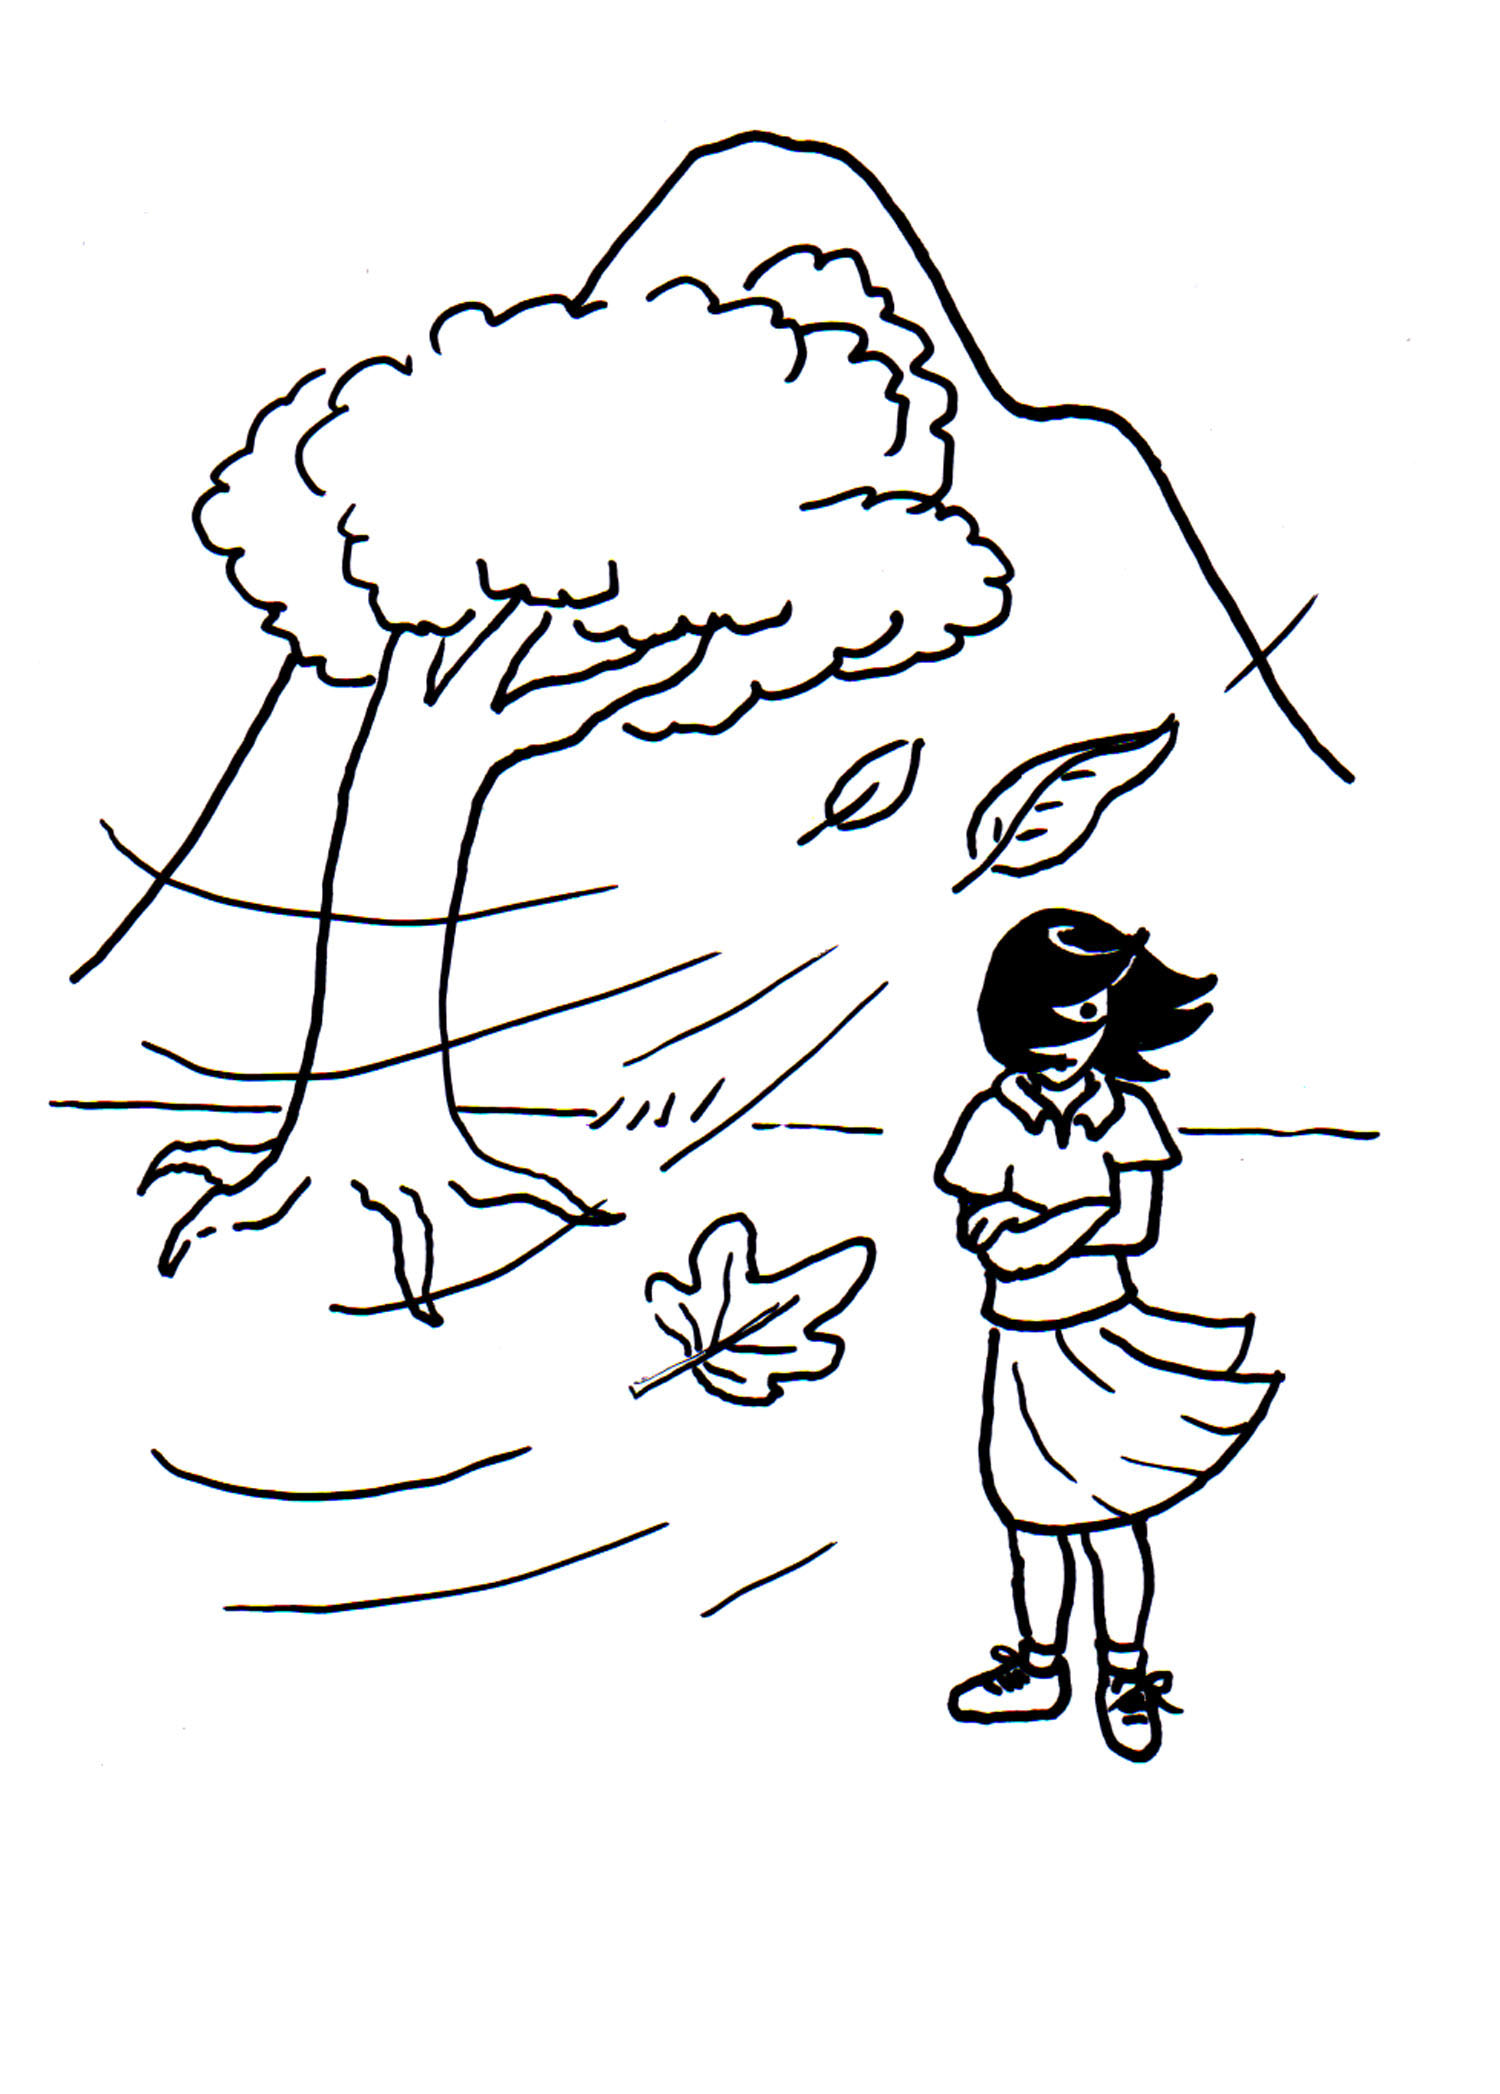 Hurricane coloring pages